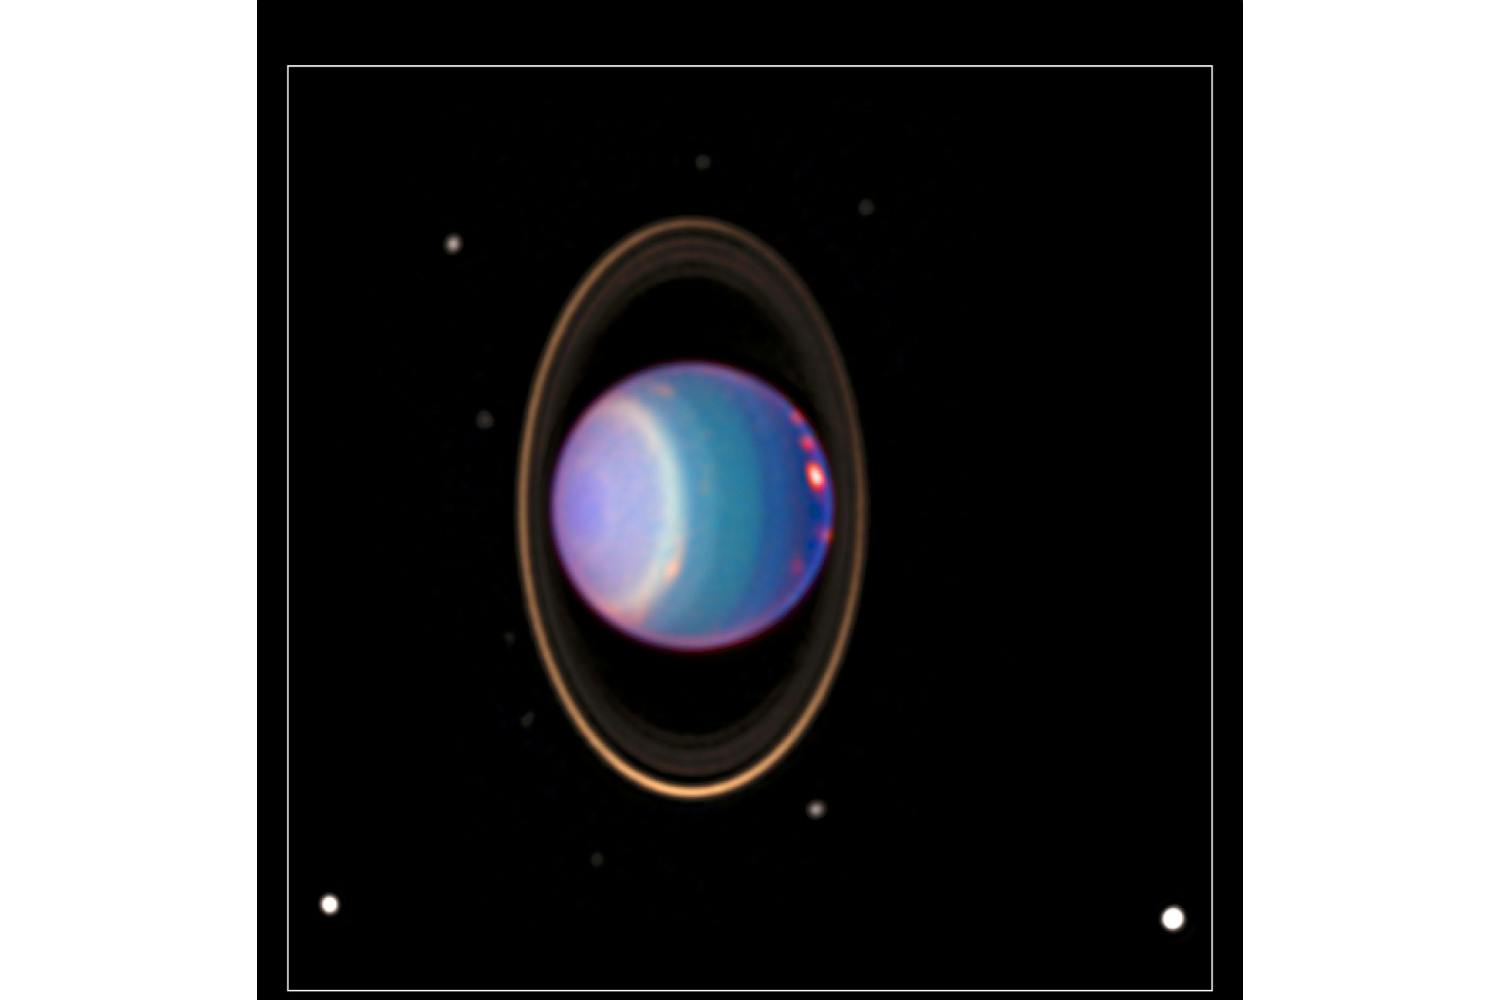 Mission to Uranus - Get facts about this planet